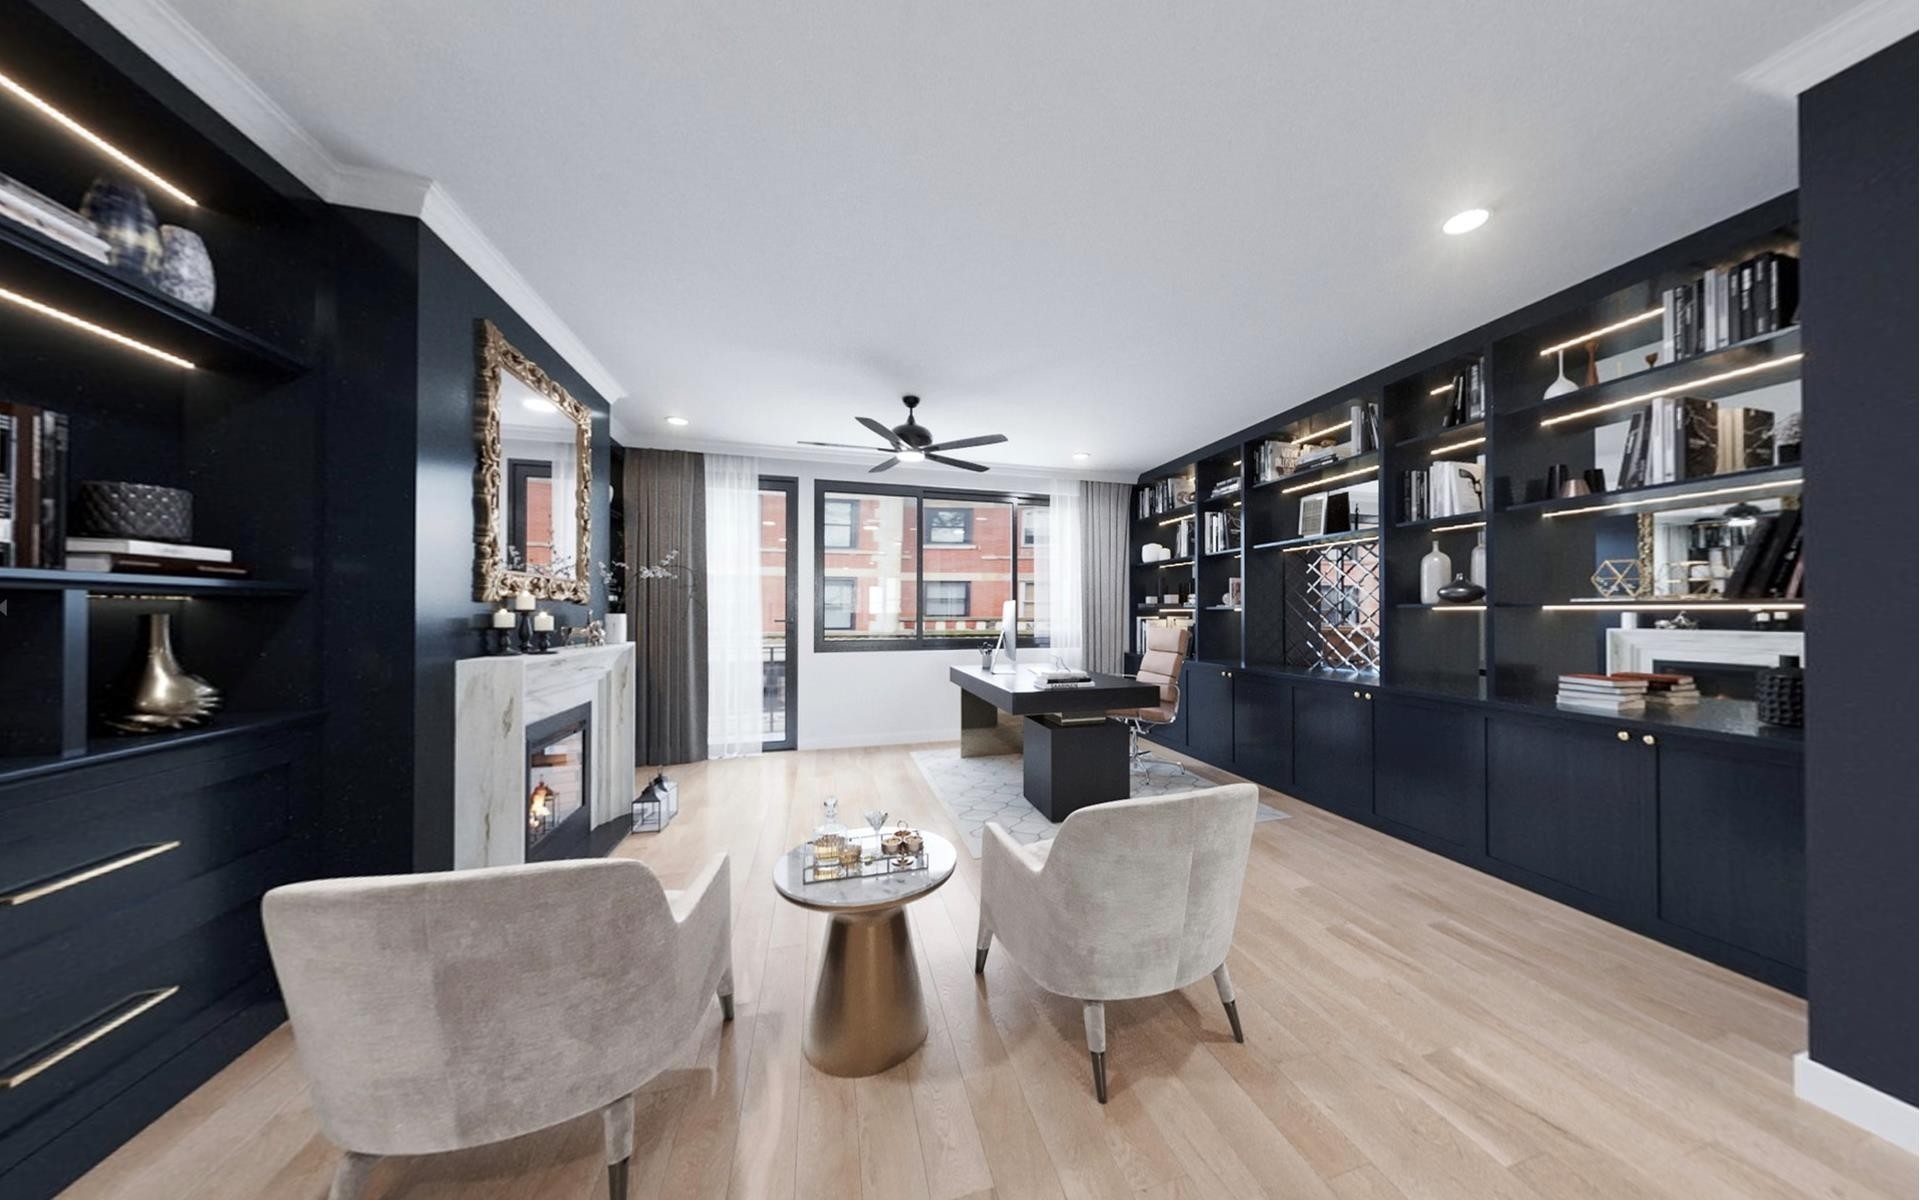 3. Single Family Townhouse for Sale at 128 W 95TH ST, TOWNHOUSE Upper West Side, New York, New York 10025